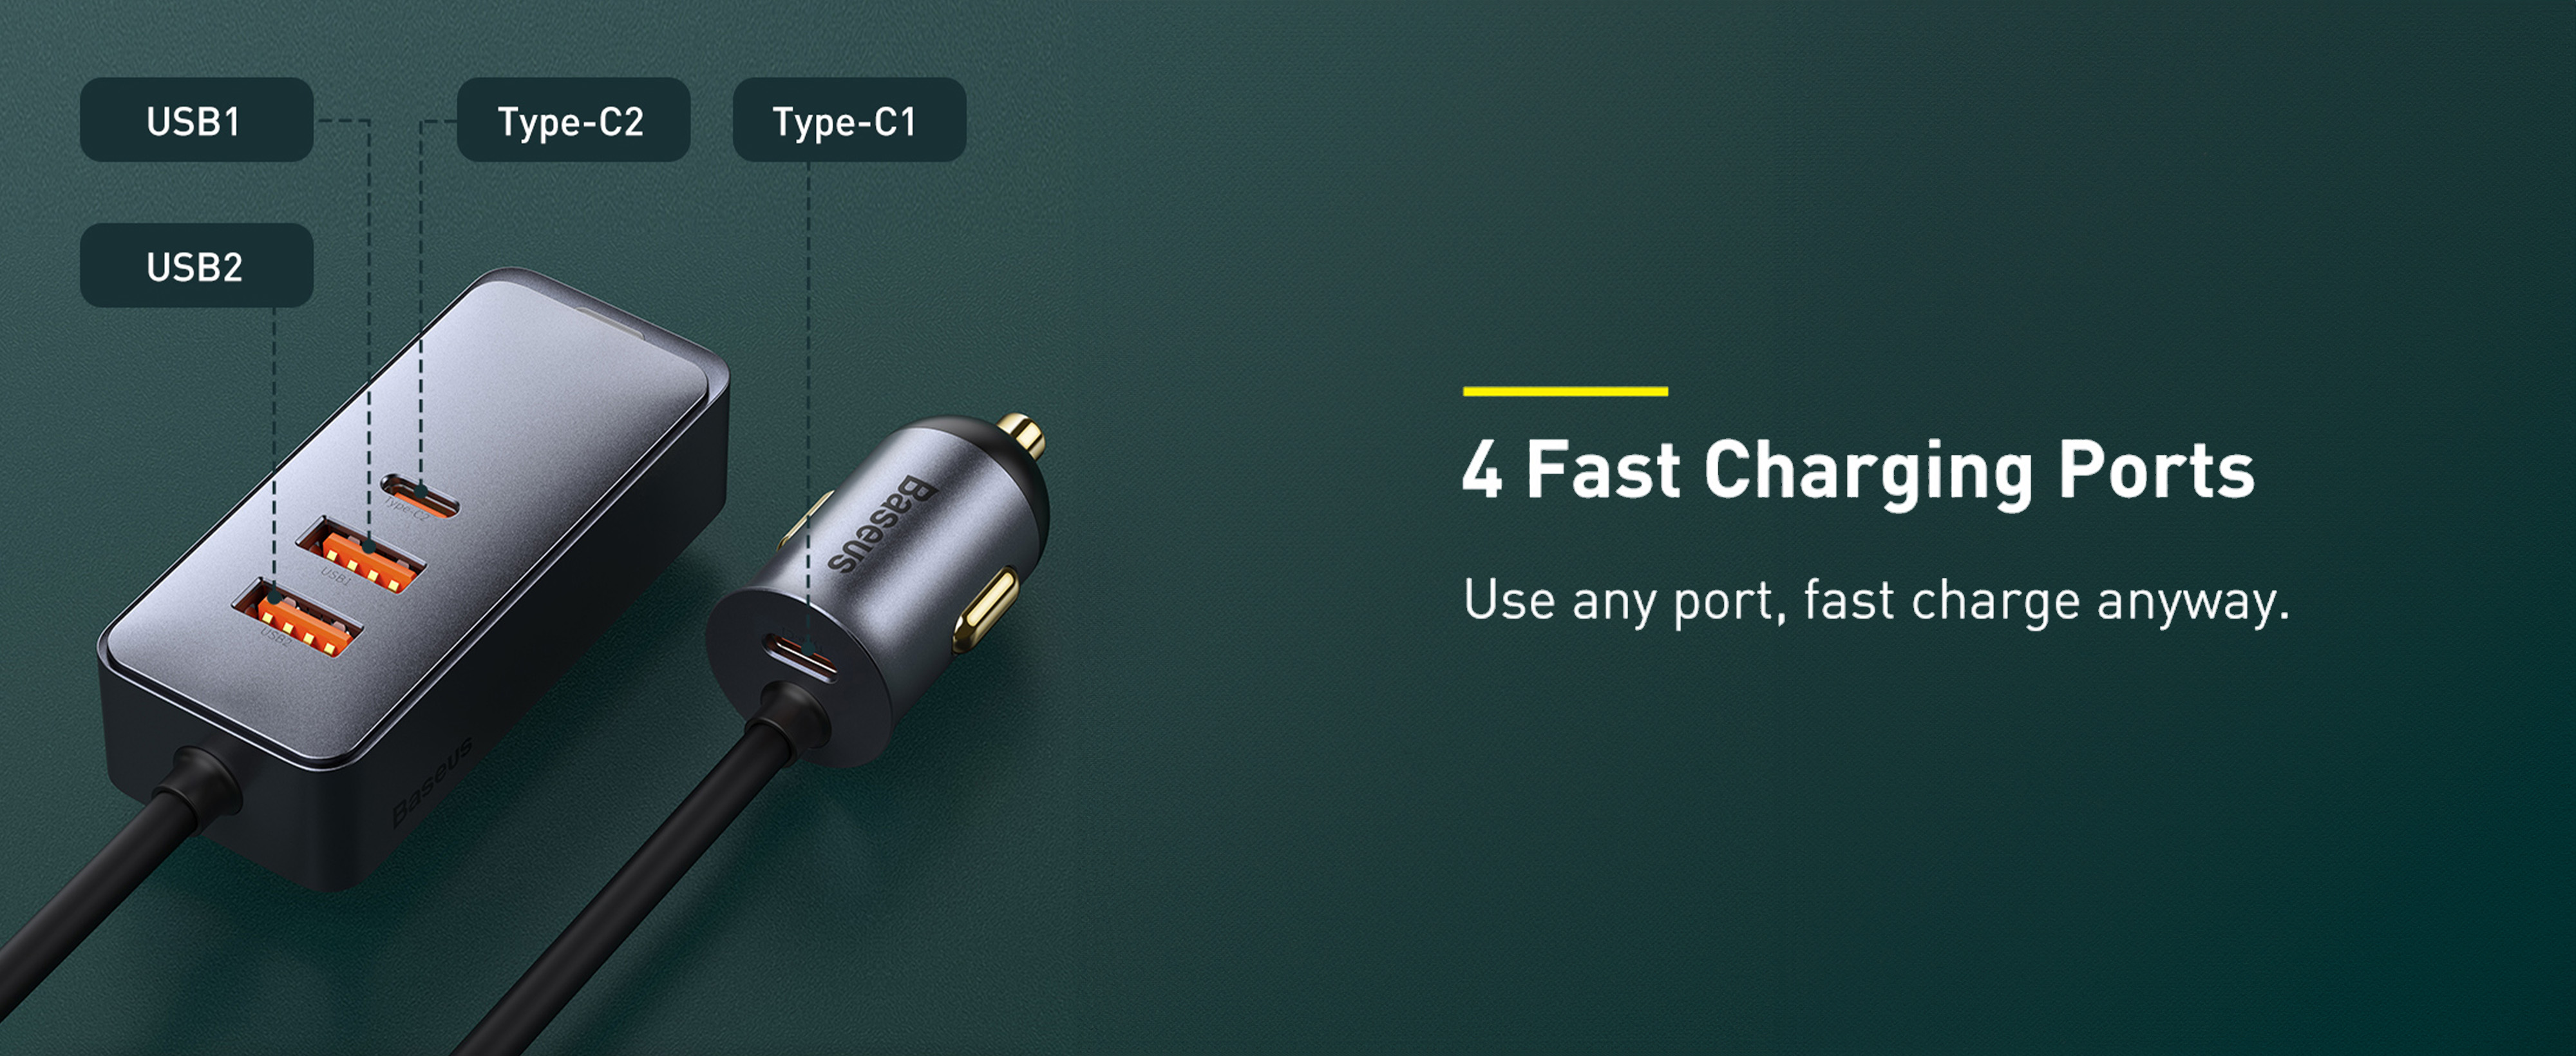 Baseus 120w Multi USB Car Charger QC3.0 & PD 3.0 30w x 4 Ports Fast Car Charger USB C For Phones/Tablets/Switch, 5ft Cable for Back Seat Charging